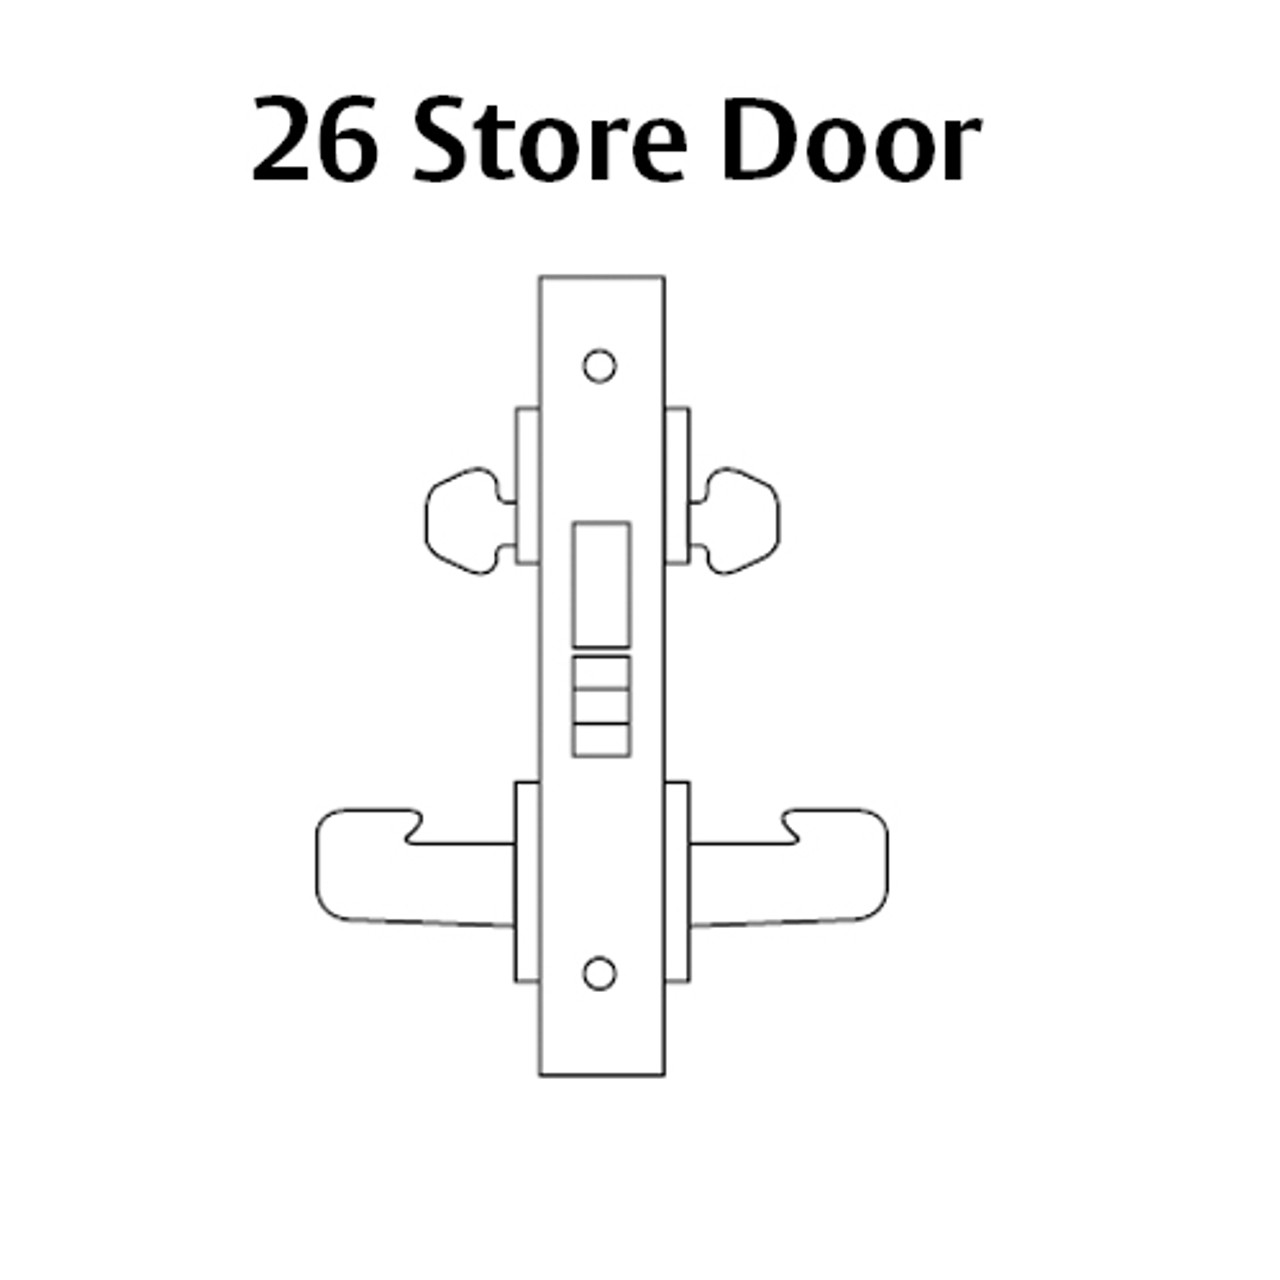 8226-LNL-26 Sargent 8200 Series Store Door Mortise Lock with LNL Lever Trim in Bright Chrome